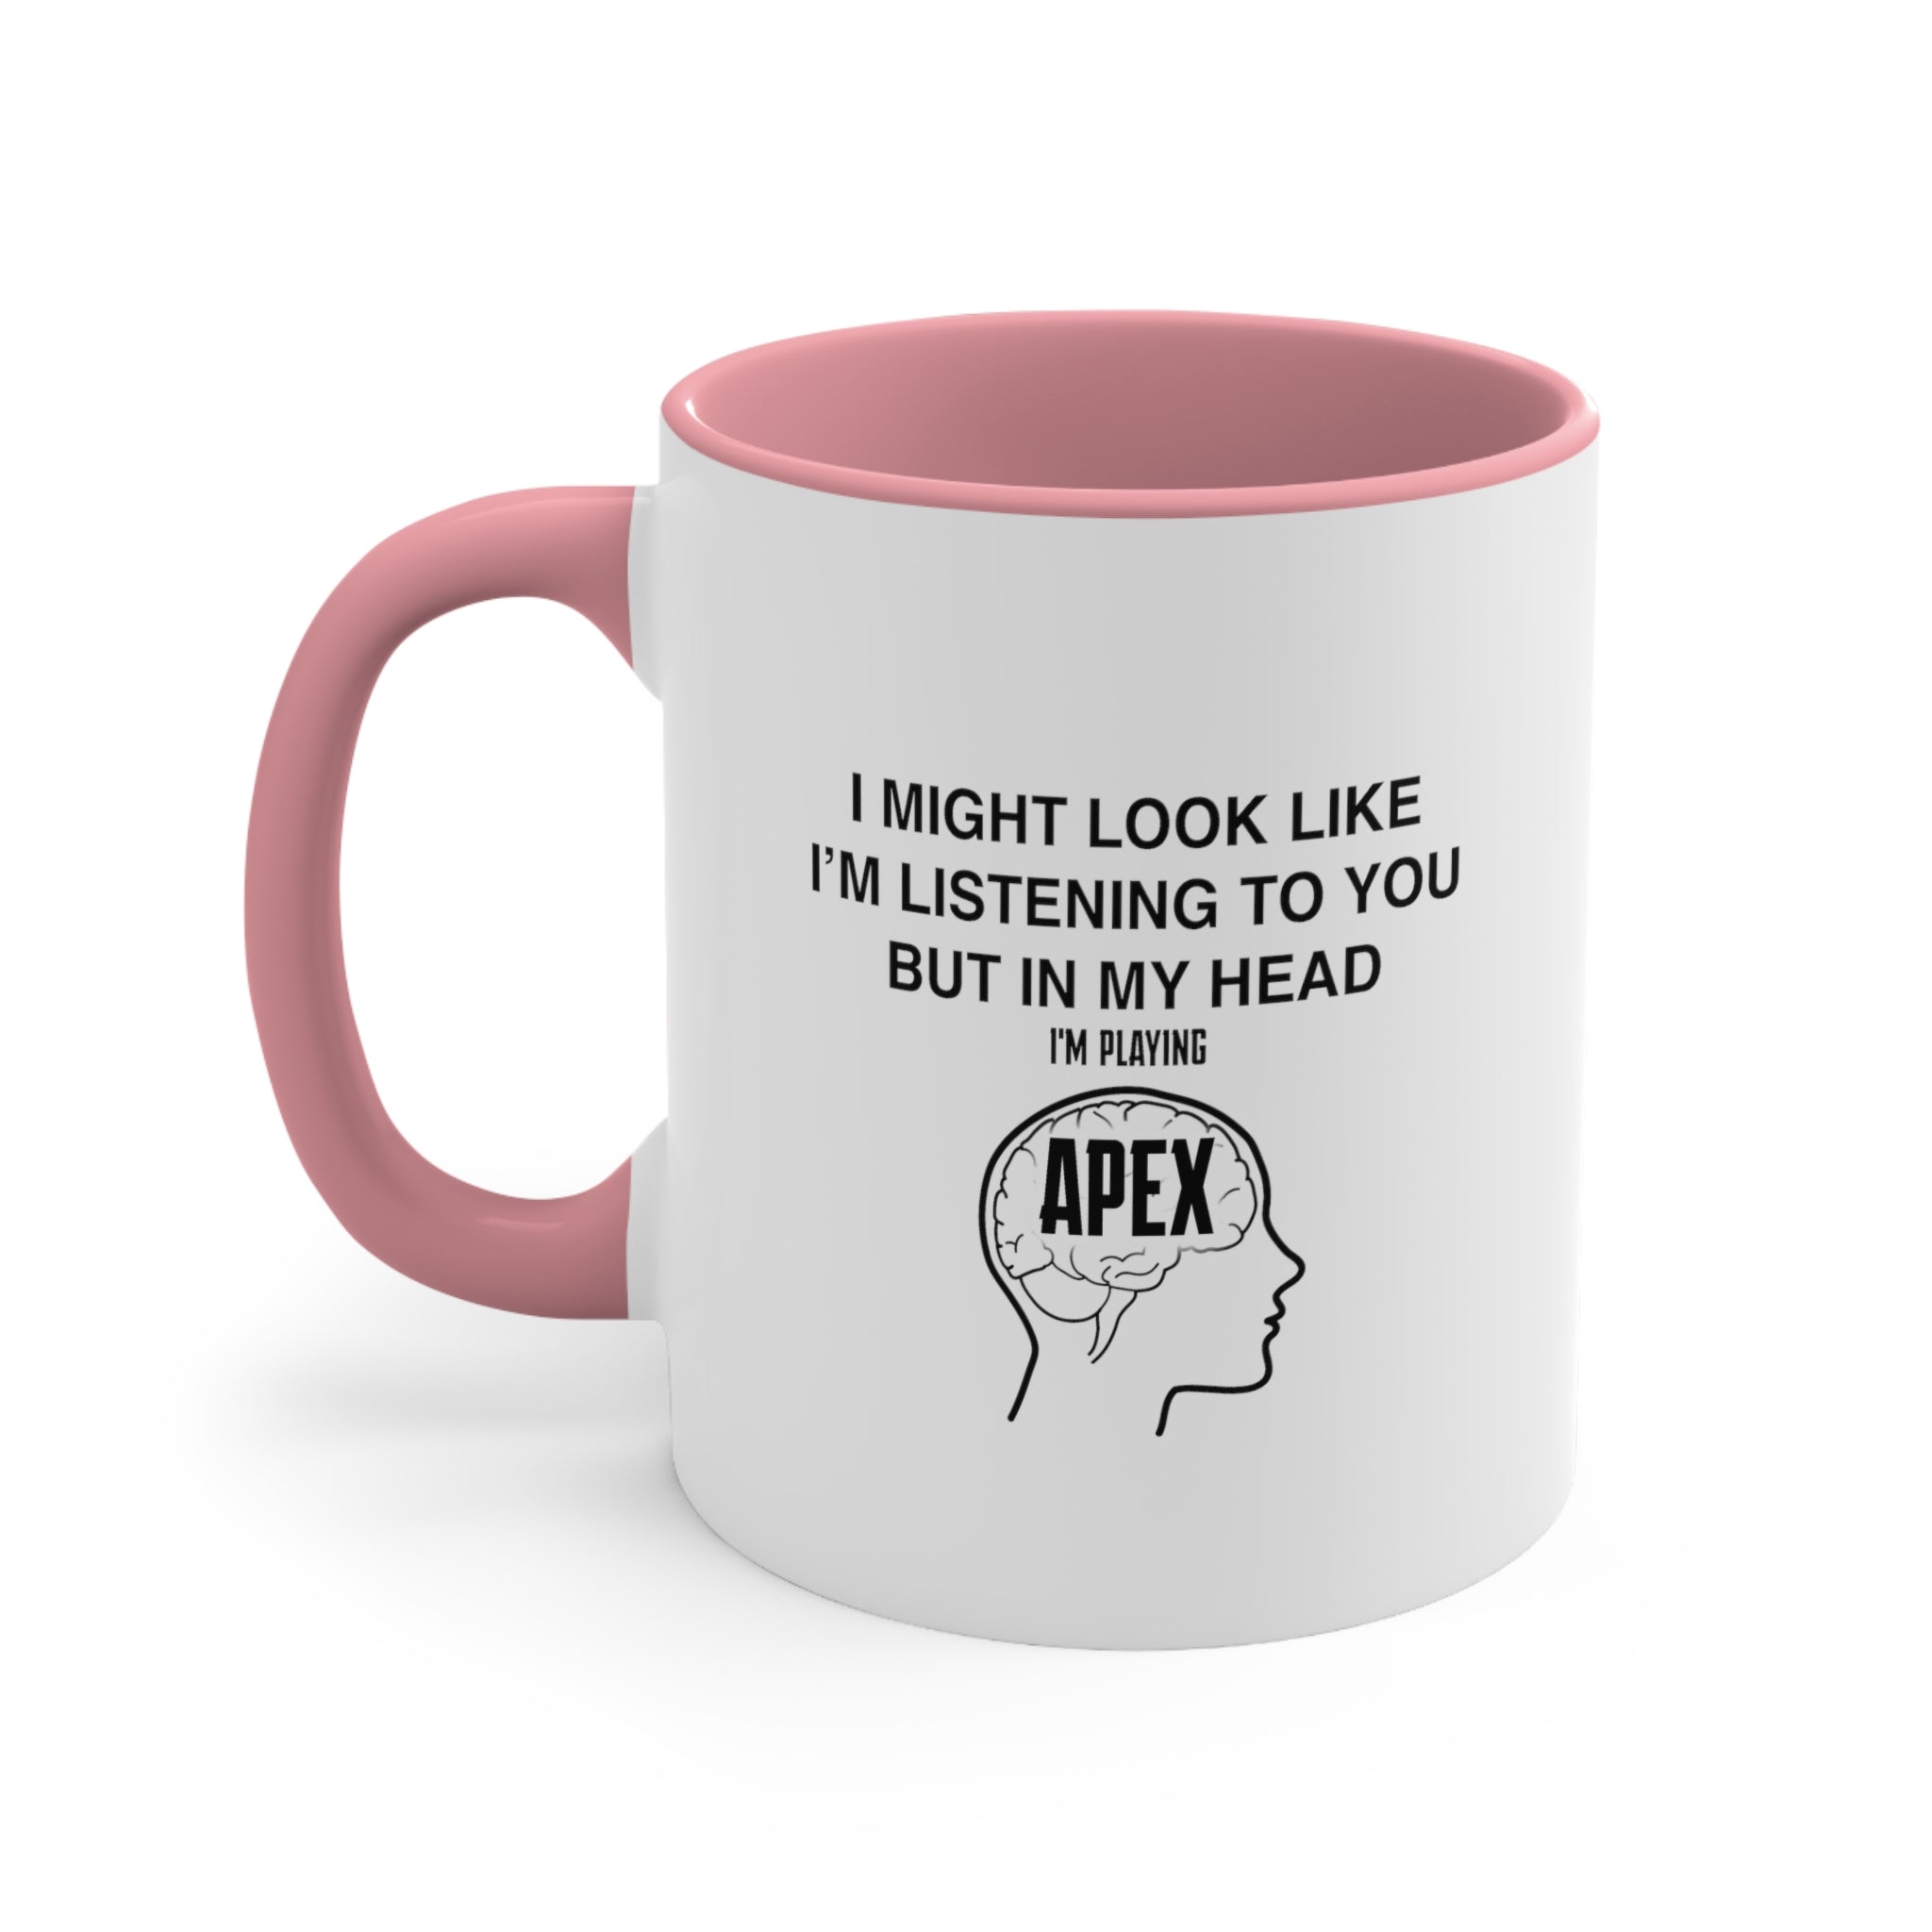 Apex Legends Funny Coffee Mug, 11oz I Might Look Like I'm Listening To You Joke Humor Humour Gift For Him Cup Birthday Christmas